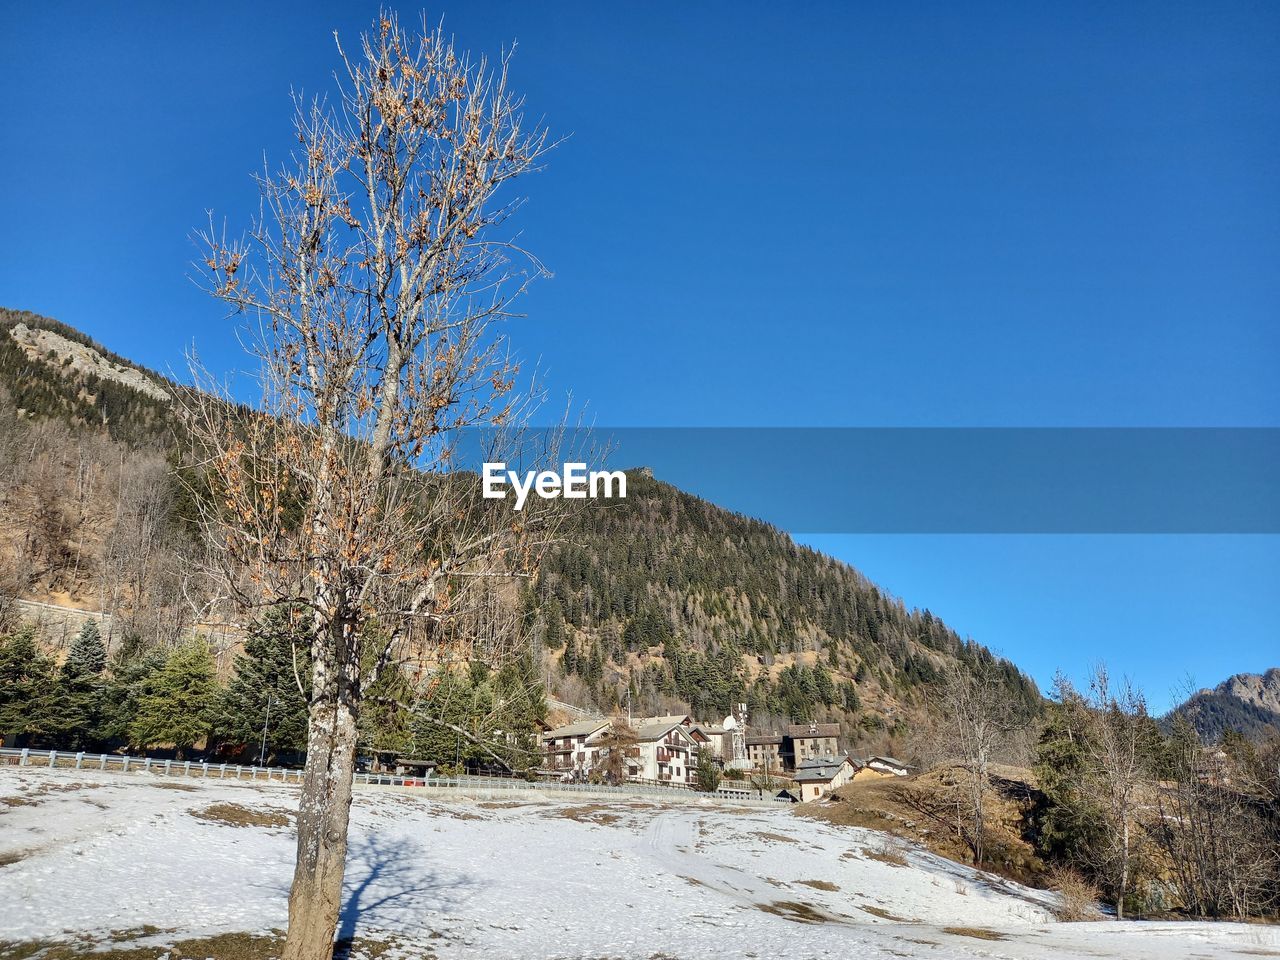 tree, sky, mountain, snow, plant, winter, wilderness, nature, scenics - nature, blue, environment, landscape, mountain range, clear sky, land, beauty in nature, no people, tranquility, pinaceae, non-urban scene, tranquil scene, day, sunny, coniferous tree, pine tree, travel, outdoors, travel destinations, valley, cold temperature, lake, ridge, sunlight, pine woodland, water, forest, tourism